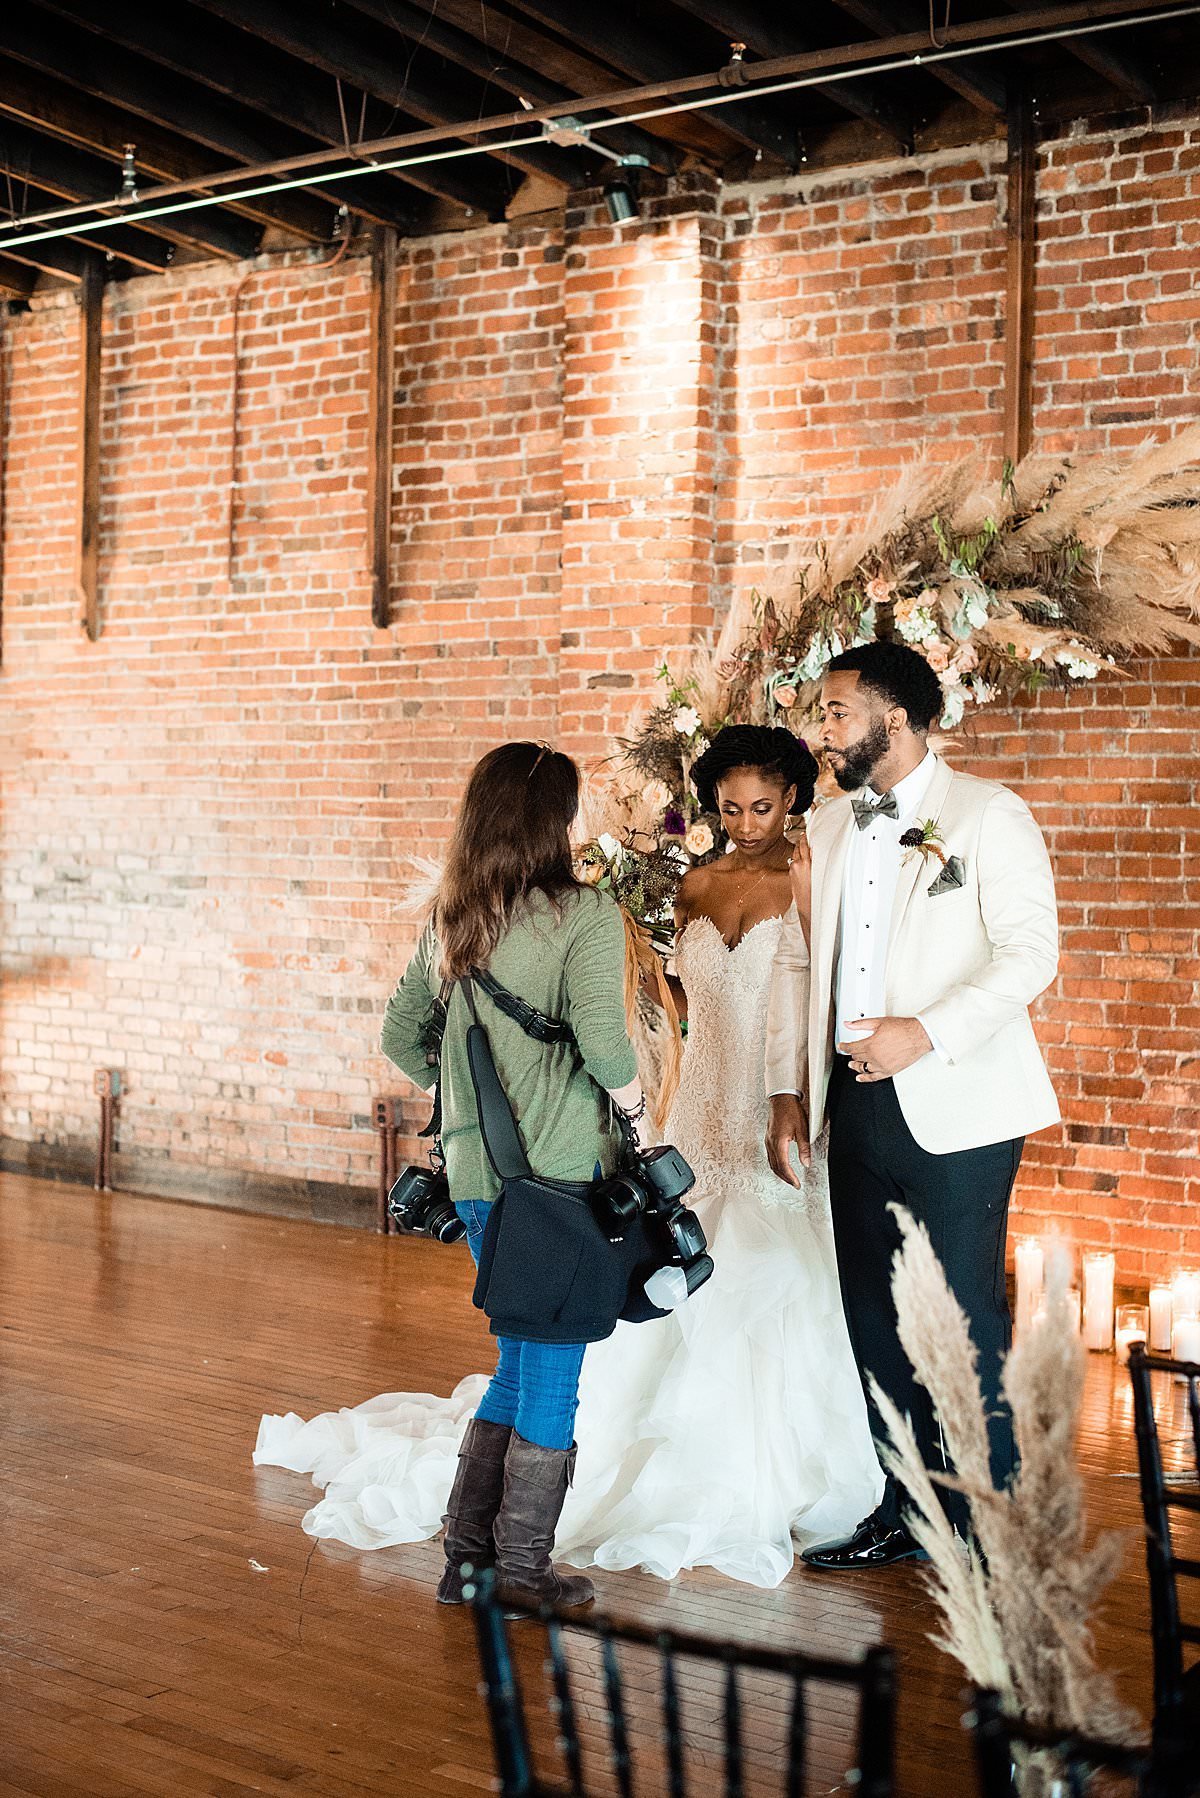 Photographer talking to bride and groom in front of their wedding arbor inside historic brick wedding venue in Nashville